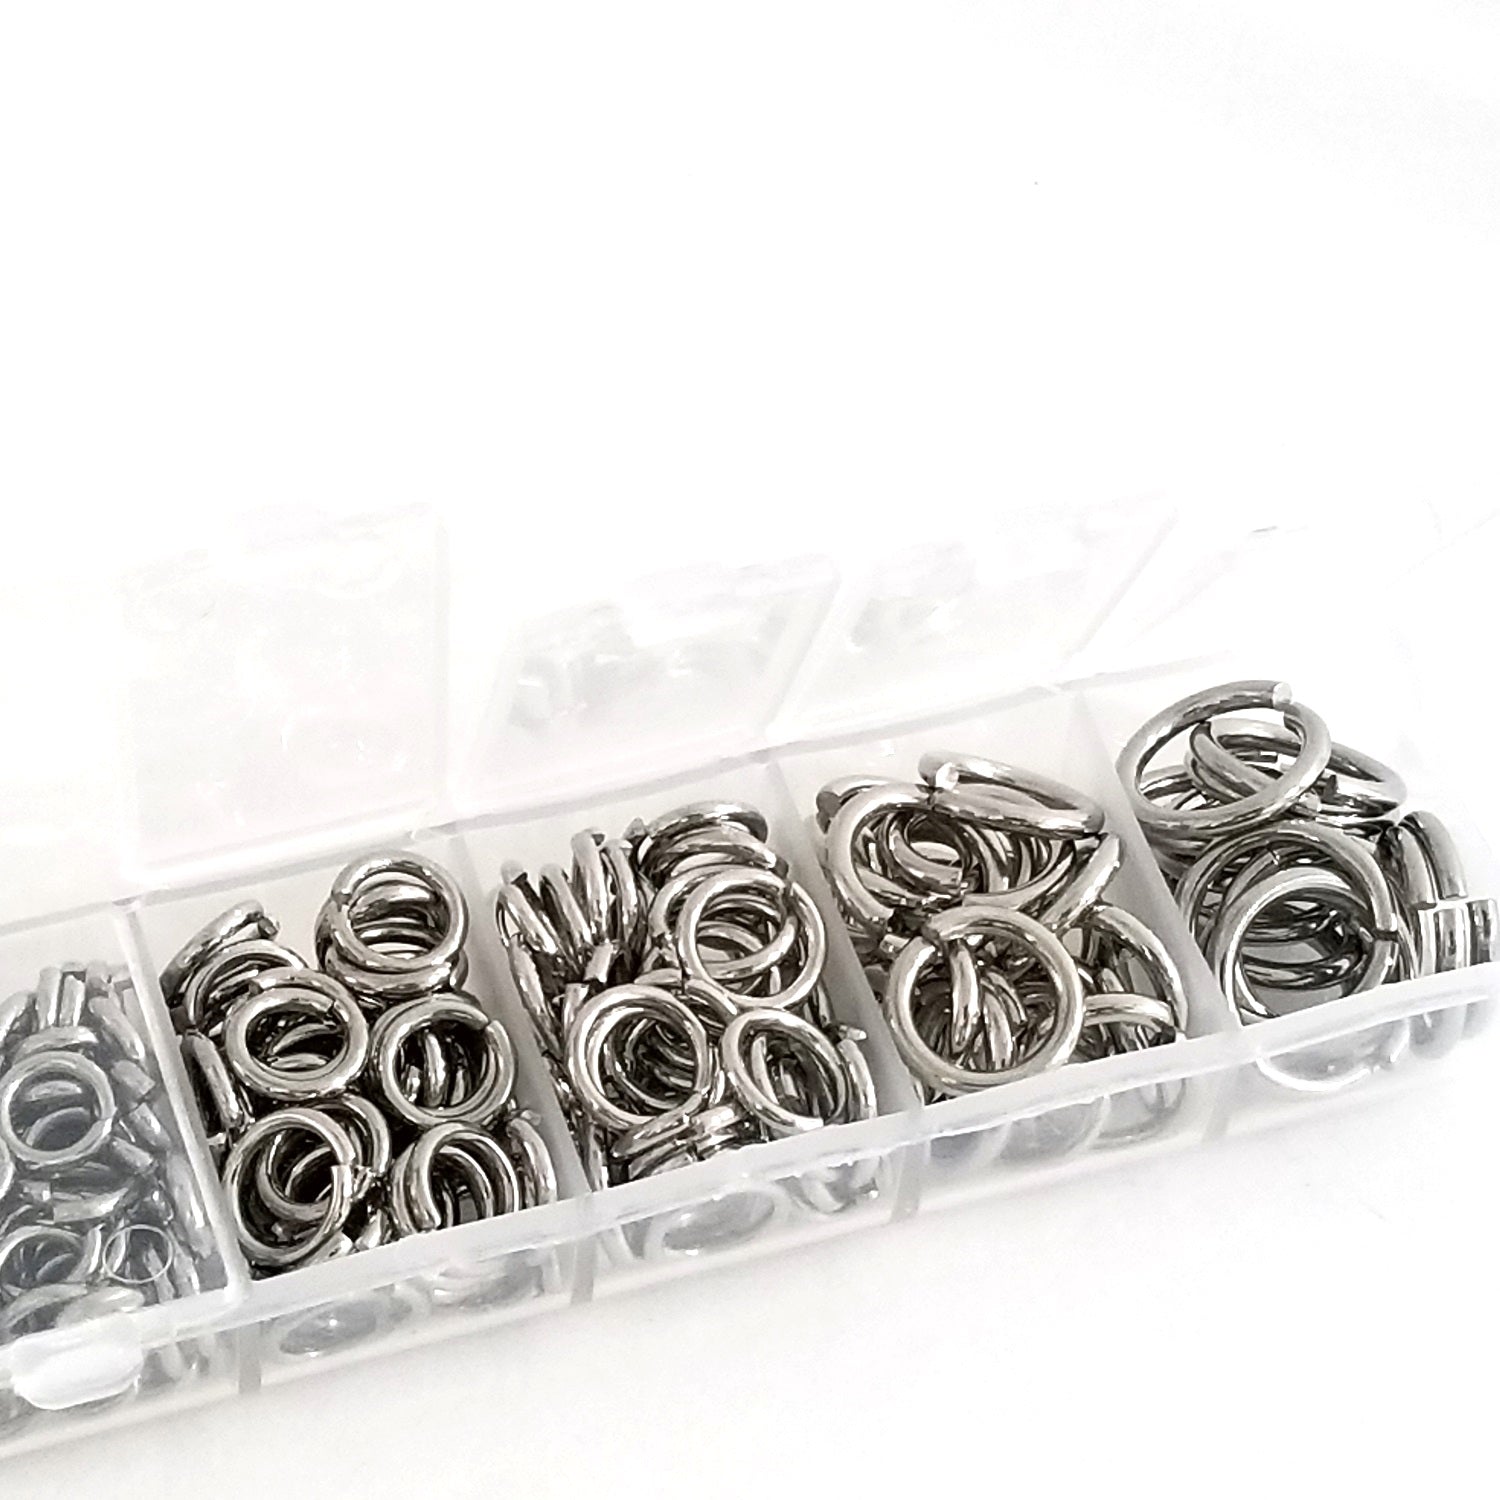 Small Thin Jump Ring Kit, 2500 Assorted Light Duty Stainless Steel, 23 -  Jewelry Tool Box